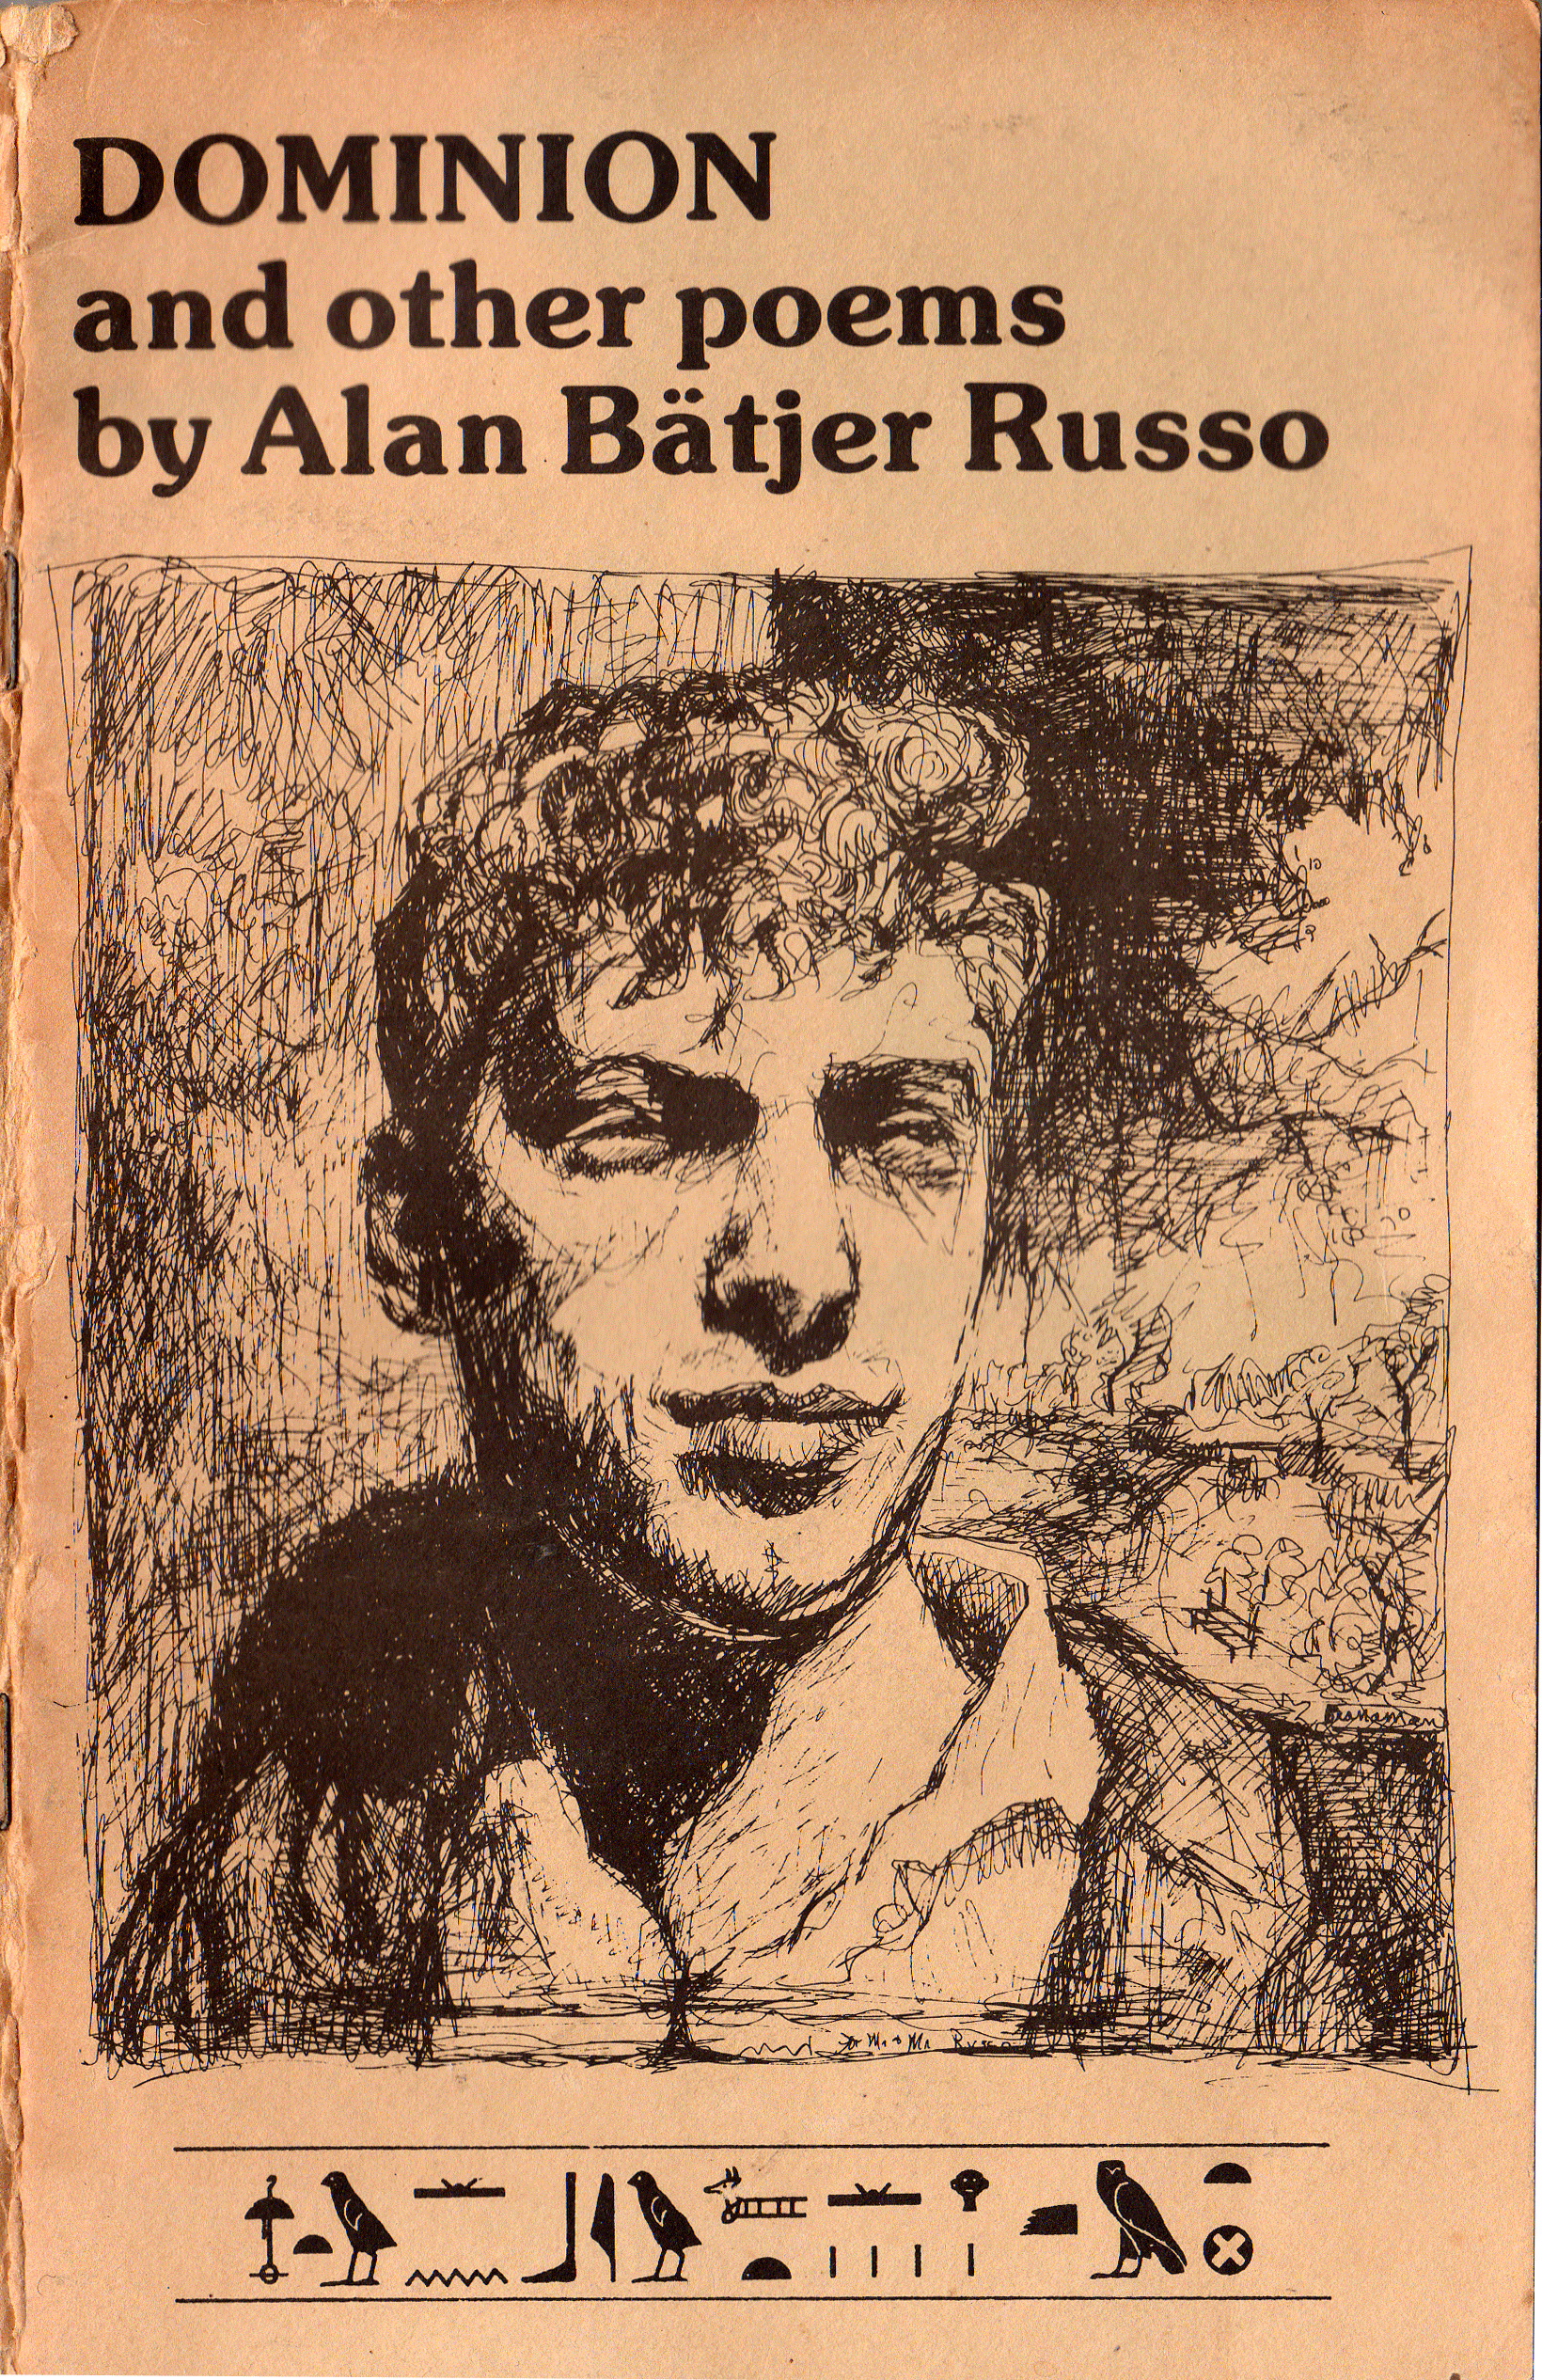 [cover drawing: Alan Russo by Robert "Bob" Branaman, copyright 1977, used with permission, all rights reserved.]